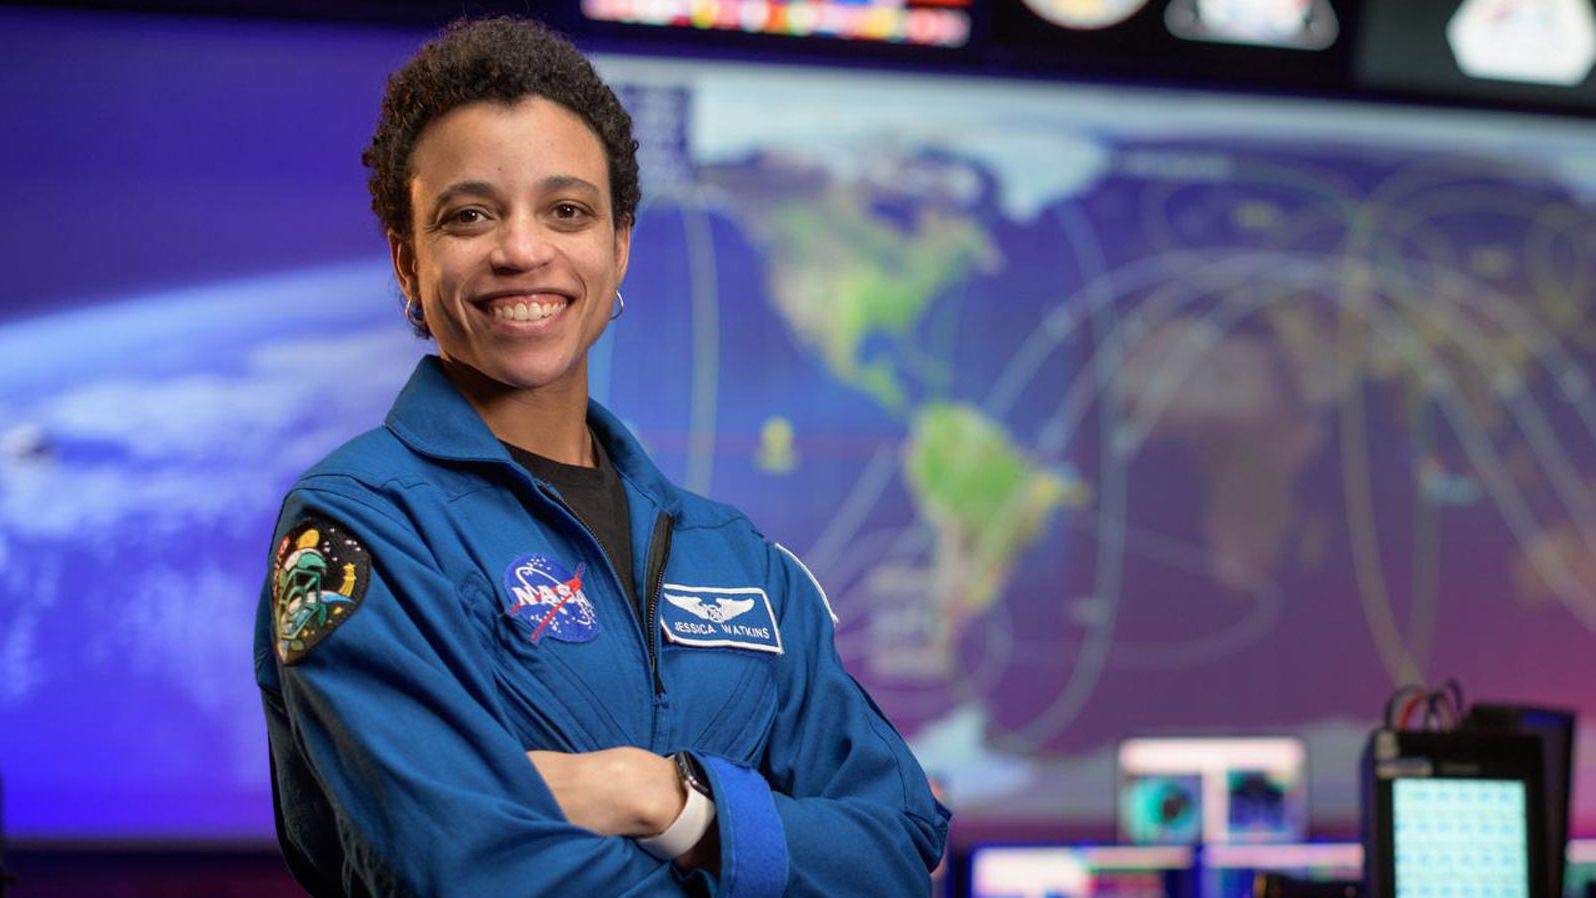 NASA astronaut Jessica Watkins is scheduled to fly to space for the first time as part of NASA's SpaceX Crew-4 mission launching to the International Space Station.